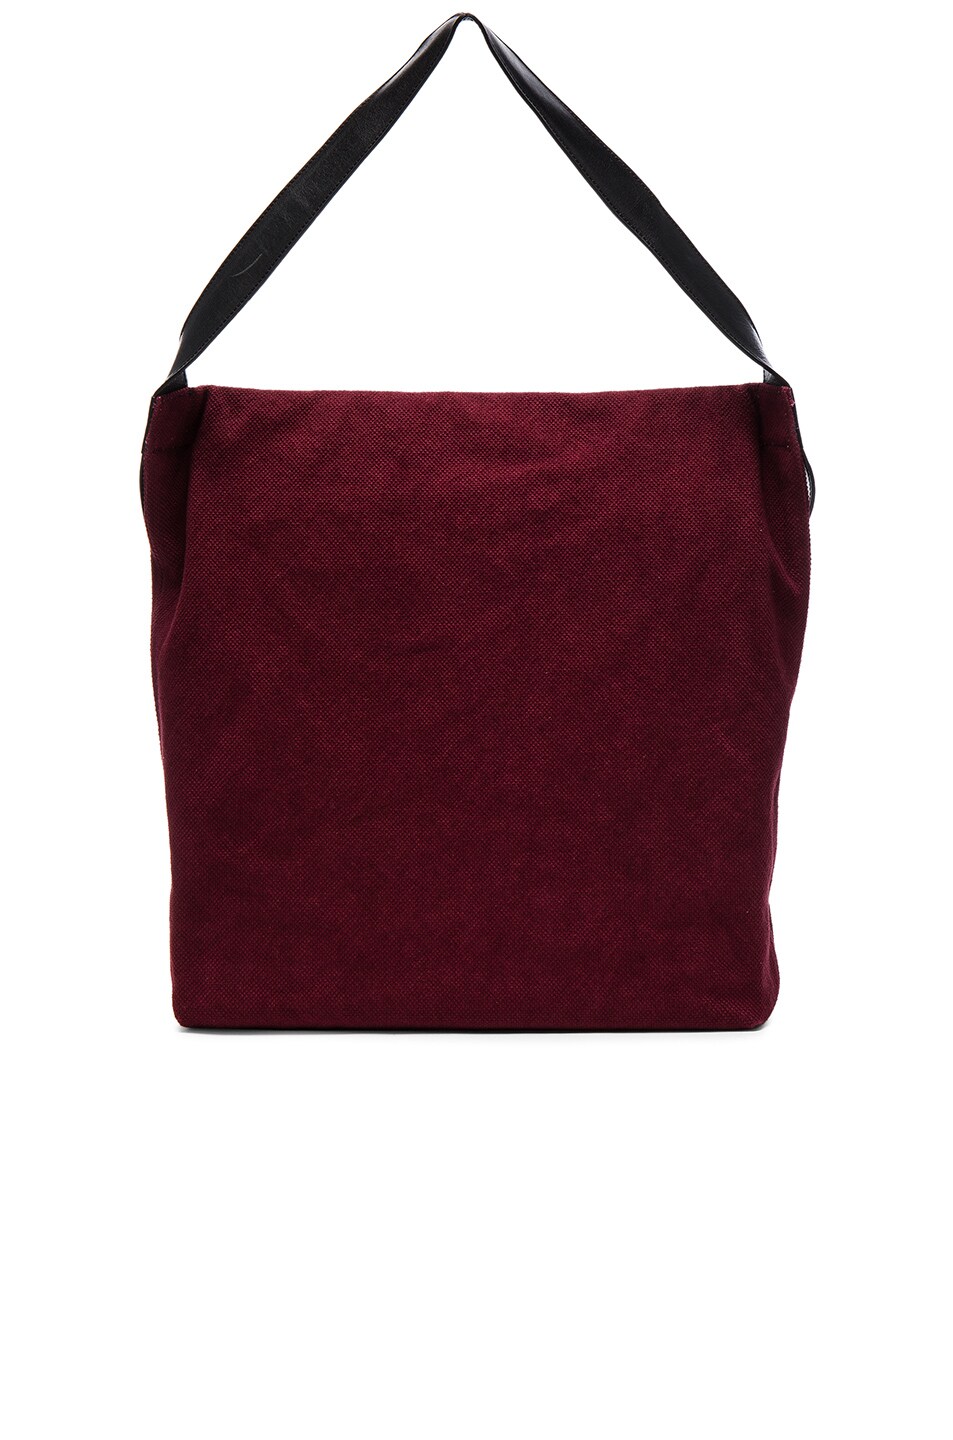 Image 1 of Ann Demeulemeester Tote Bag in Black & Bordeaux